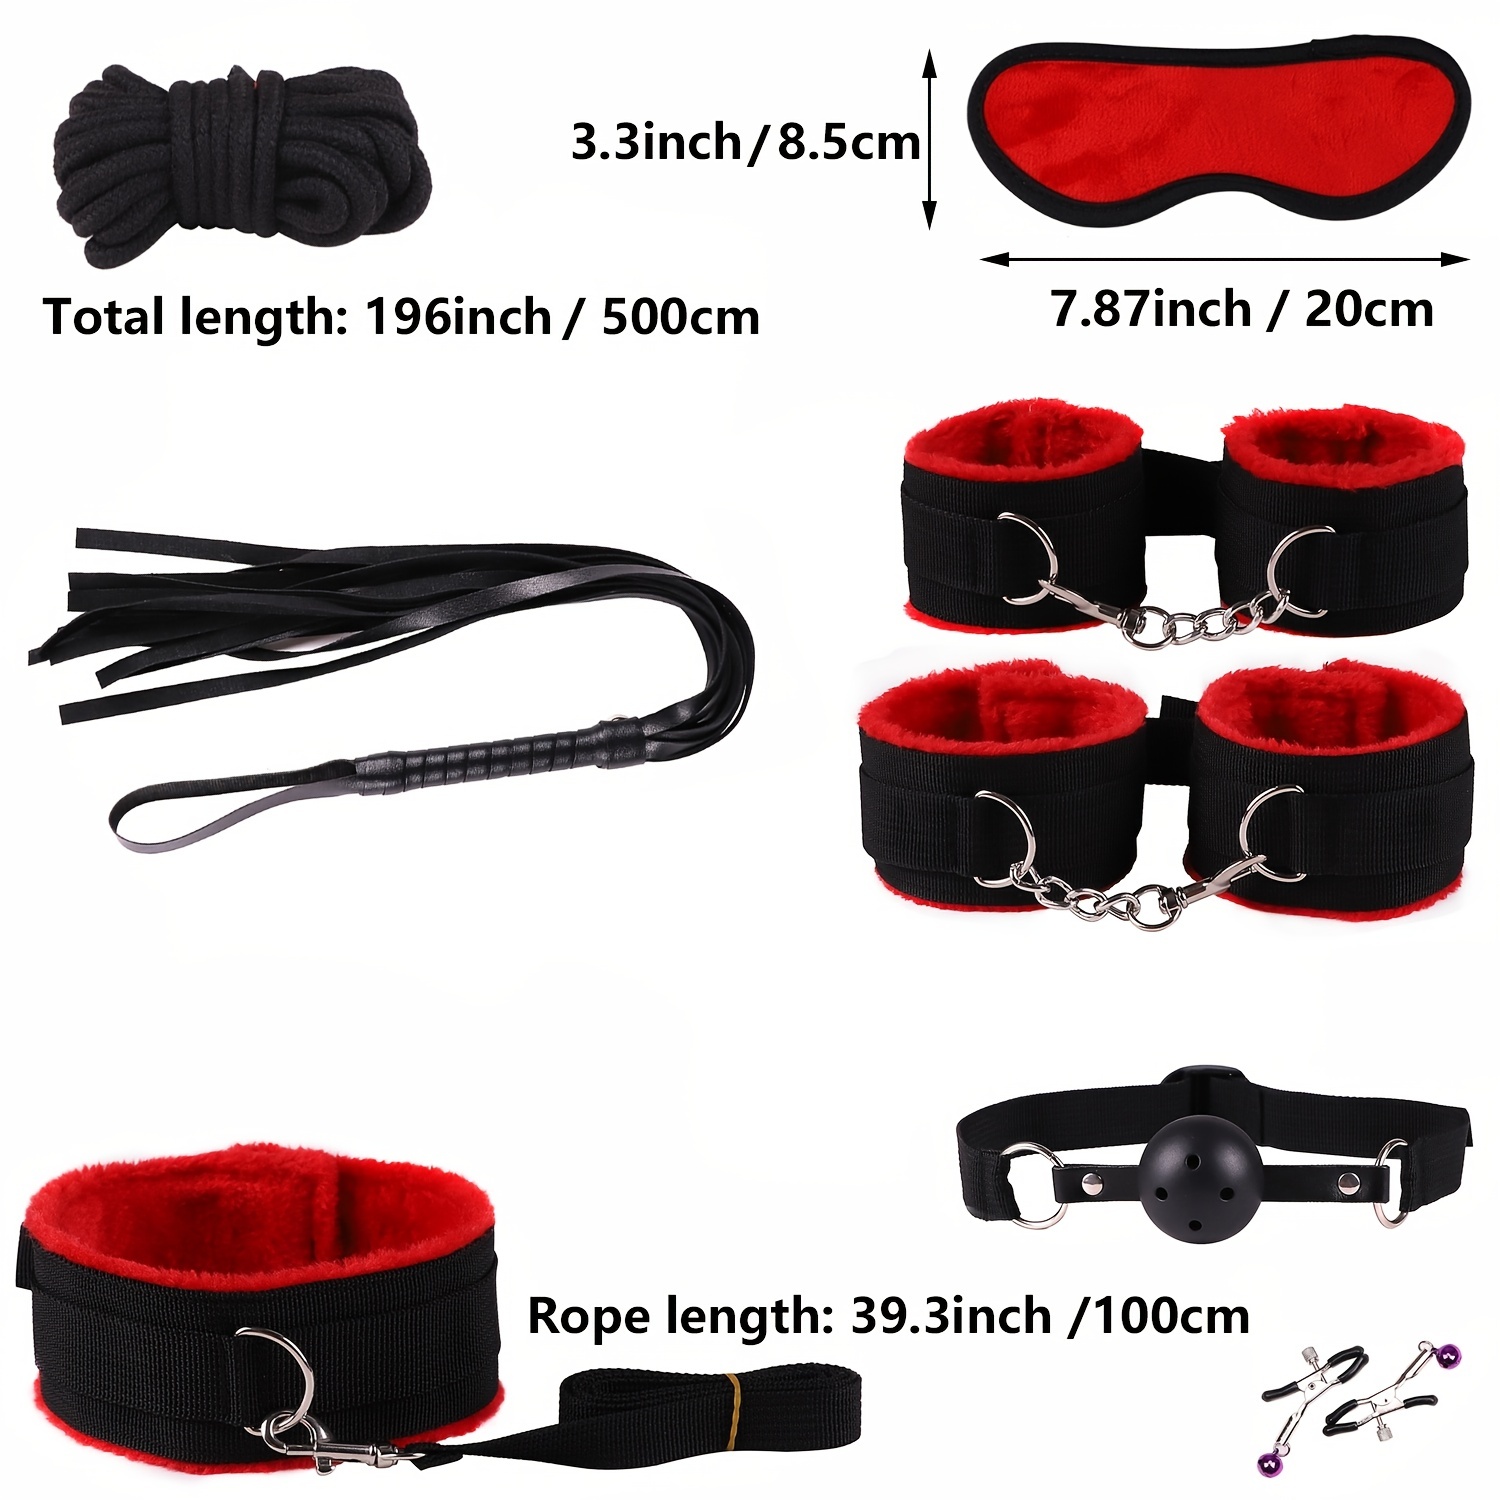 Sex Toys For Couples Exotic Accessories Adjustable Nylon BDSM Sex Bondage  Set Erotic Accessories Handcuffs Whip Rope Games J1120 From Youmvp, $11.5